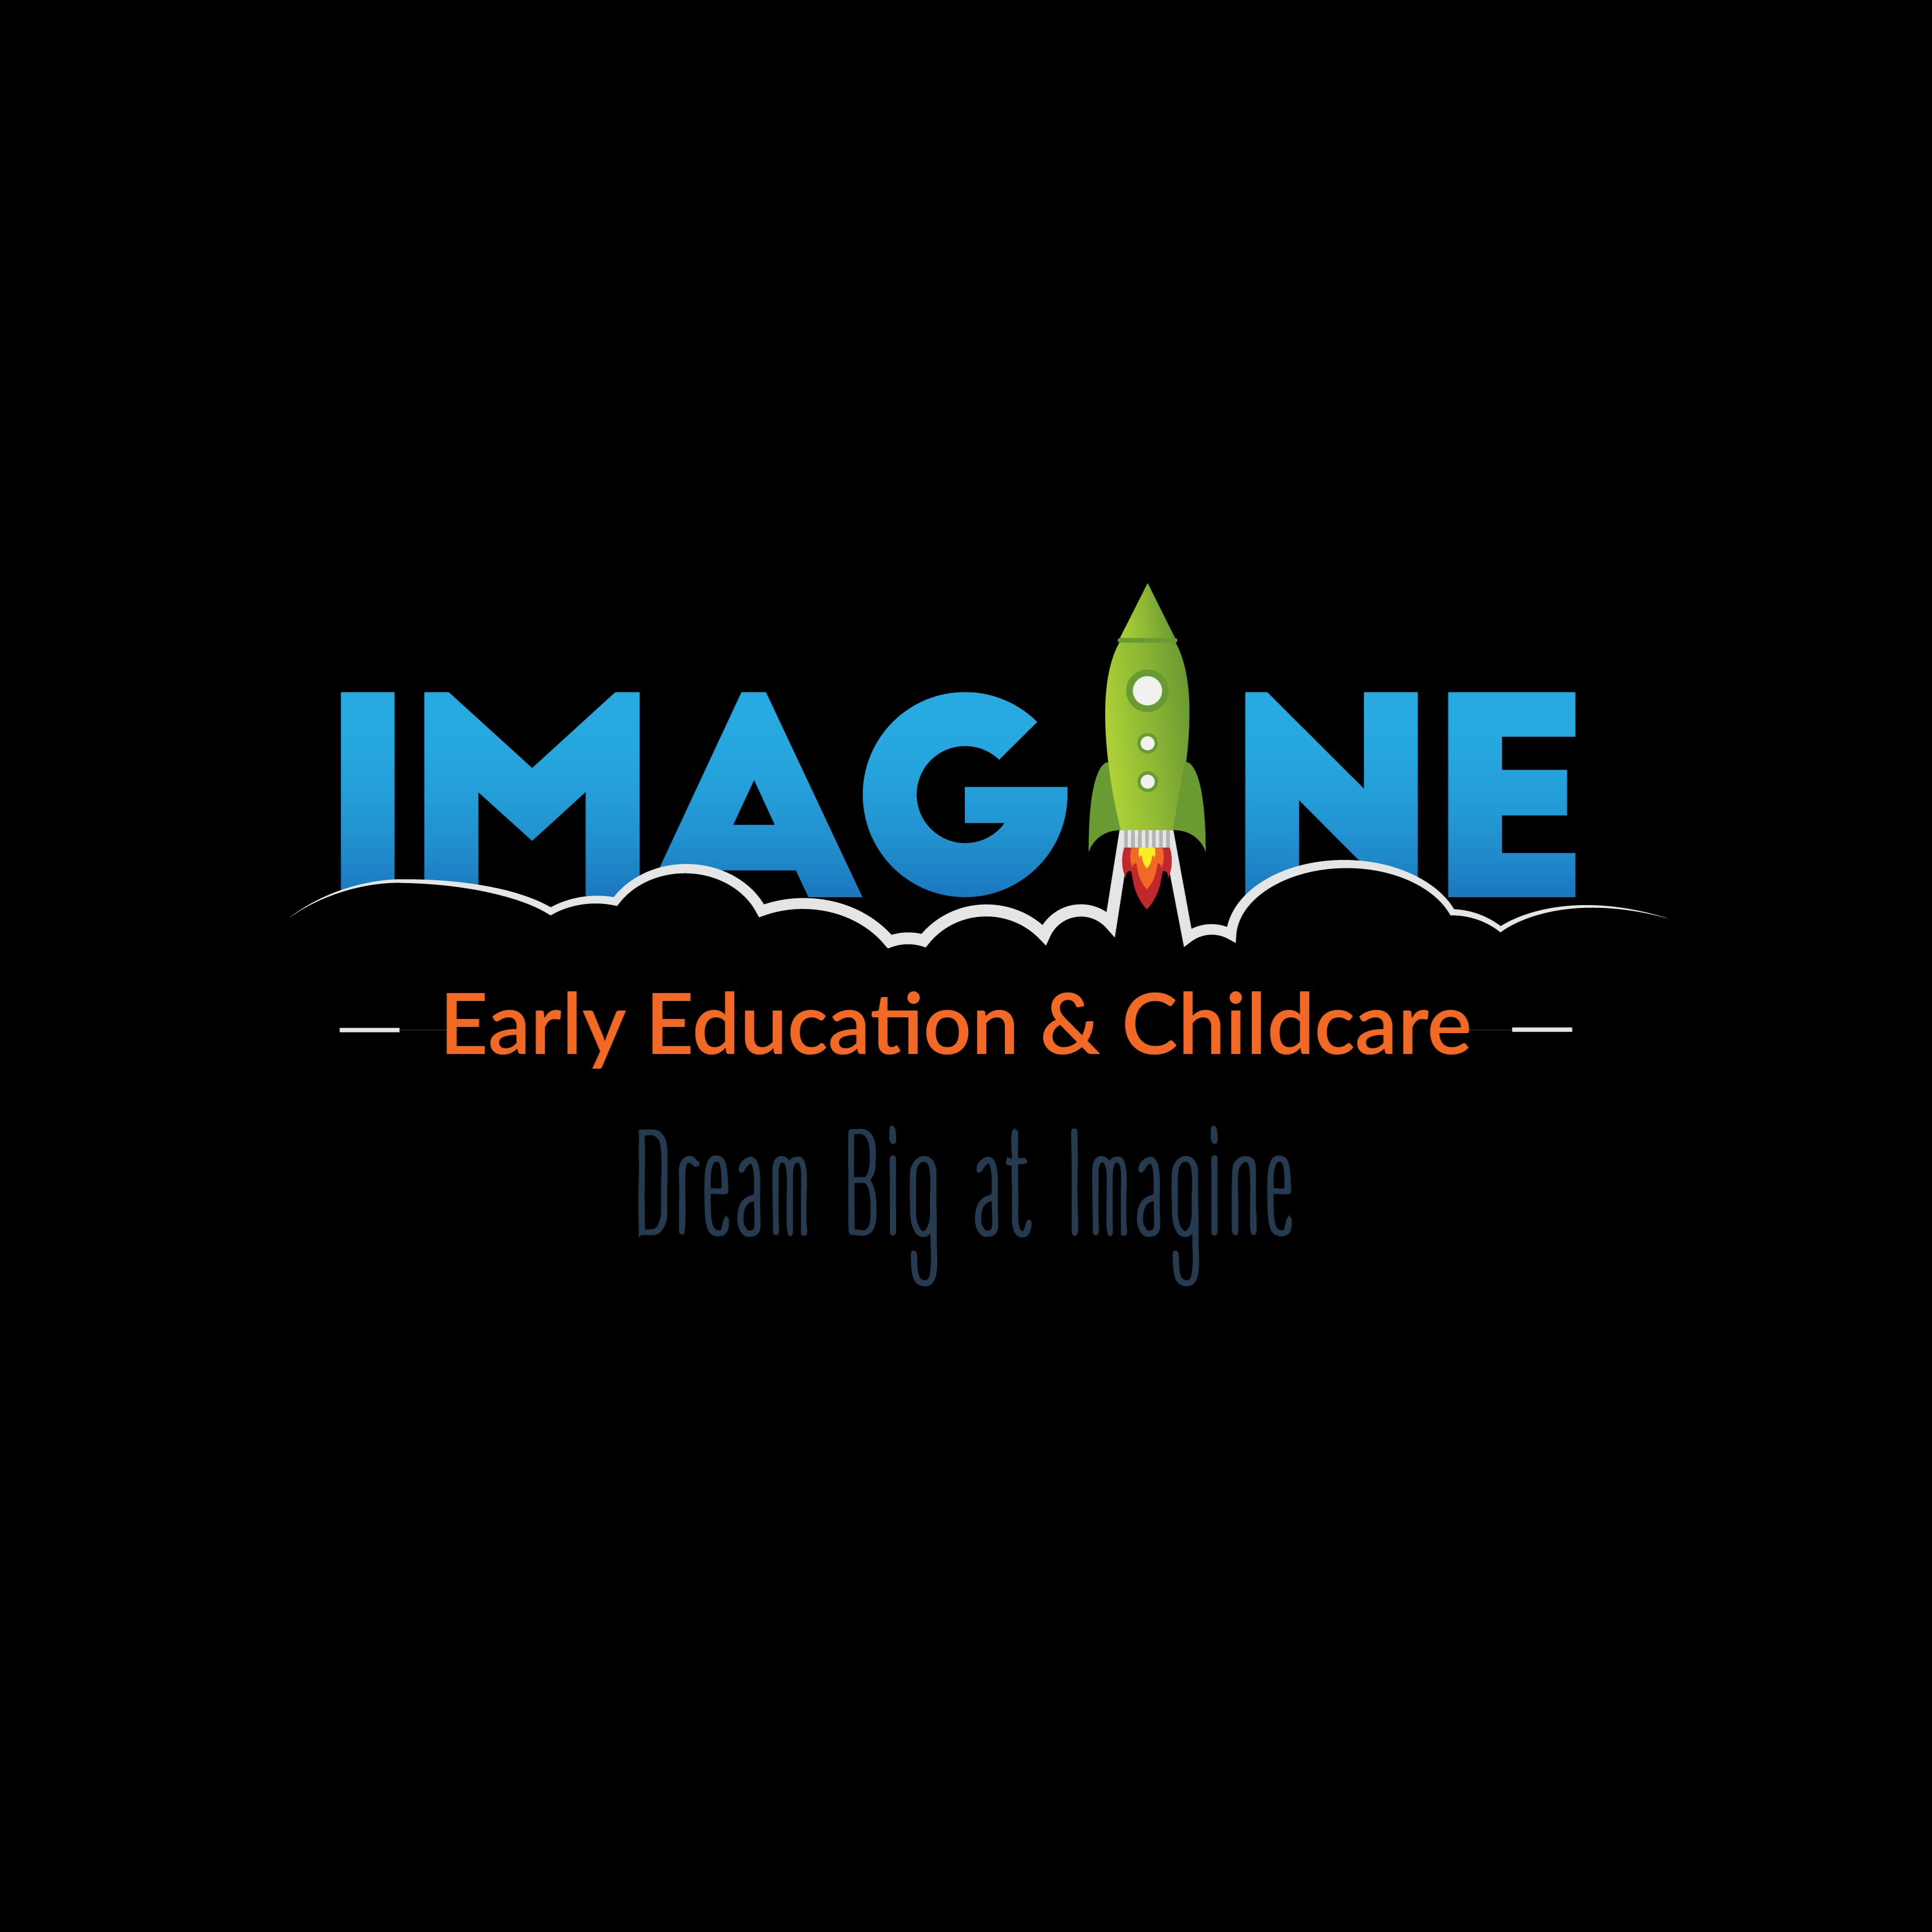 Imagine Early Education & Childcare of Cinco Ranch